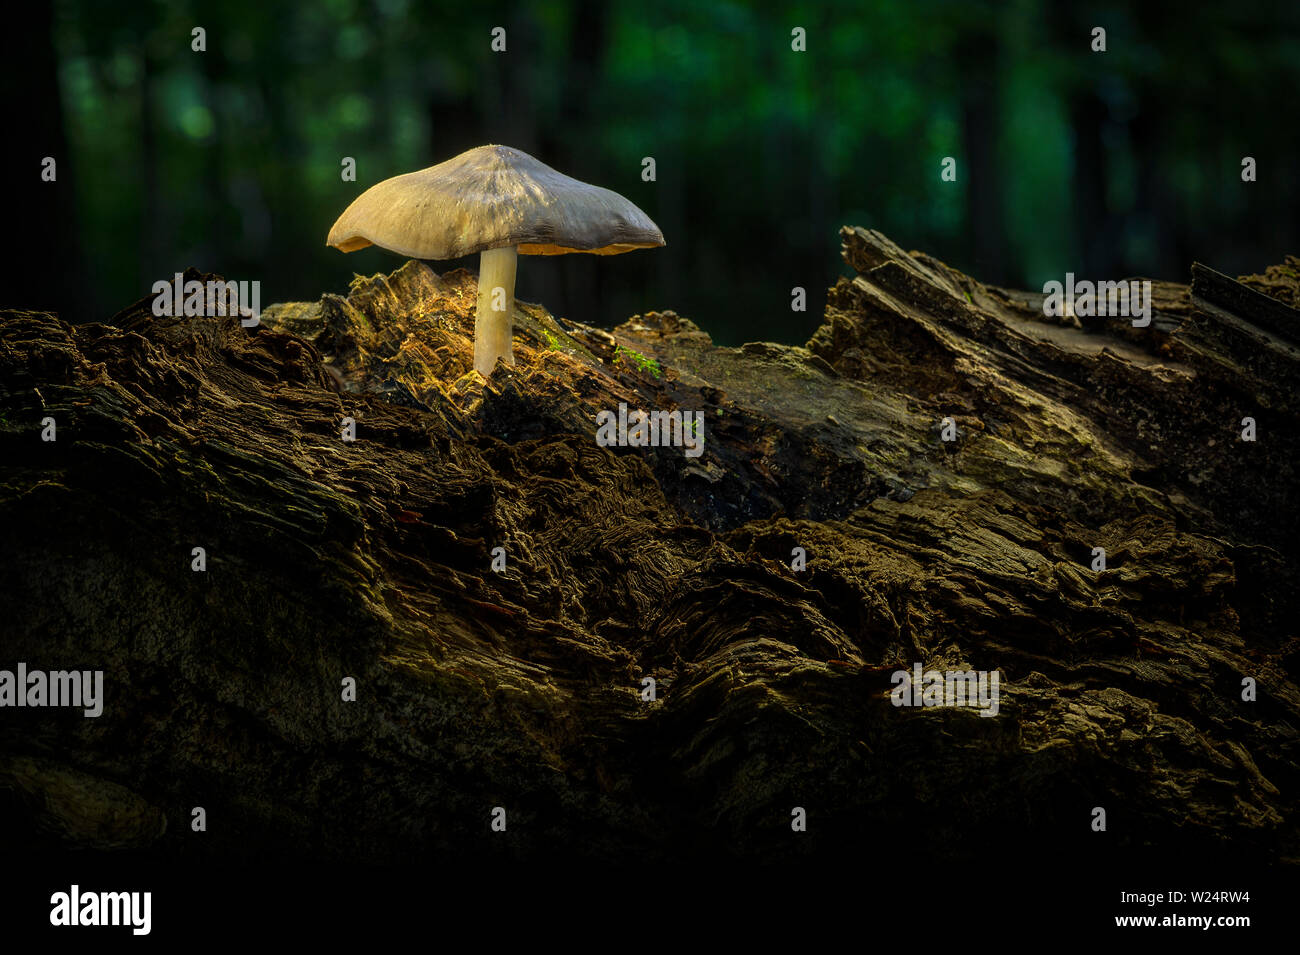 Mushroom growing on old rotten log in forest Stock Photo